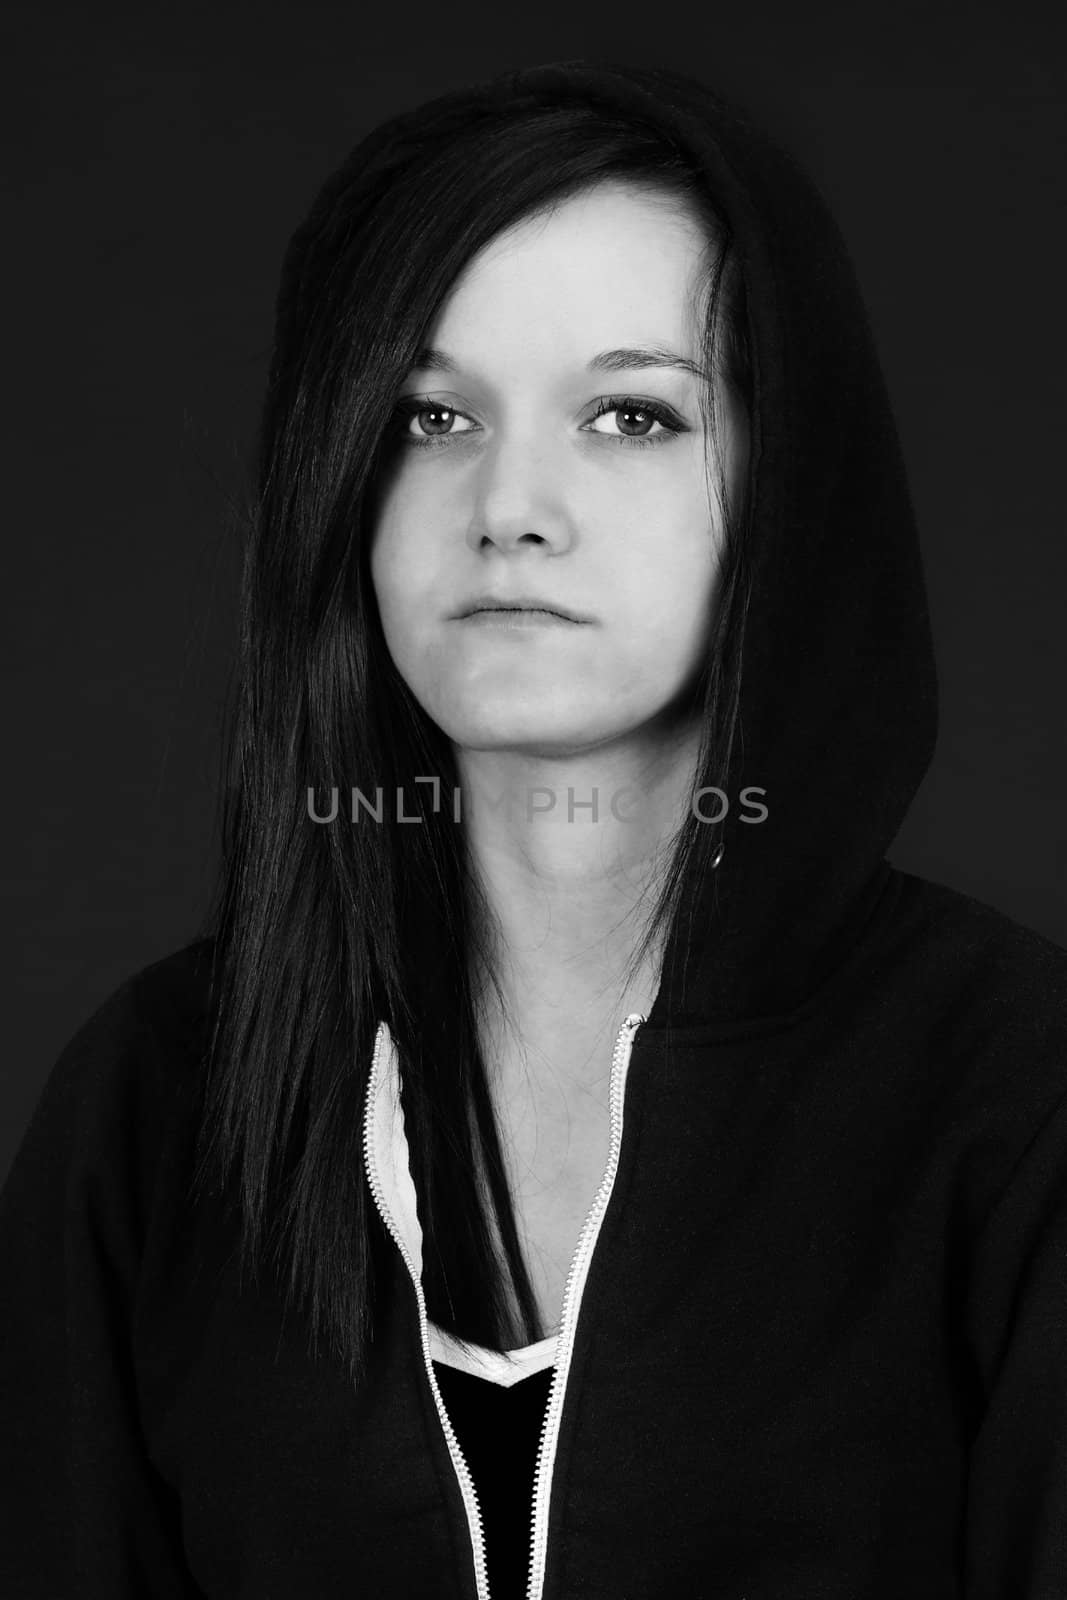 Black and white portrait of a young woman, teen or student looking sad or depressed, studio shot with black background.